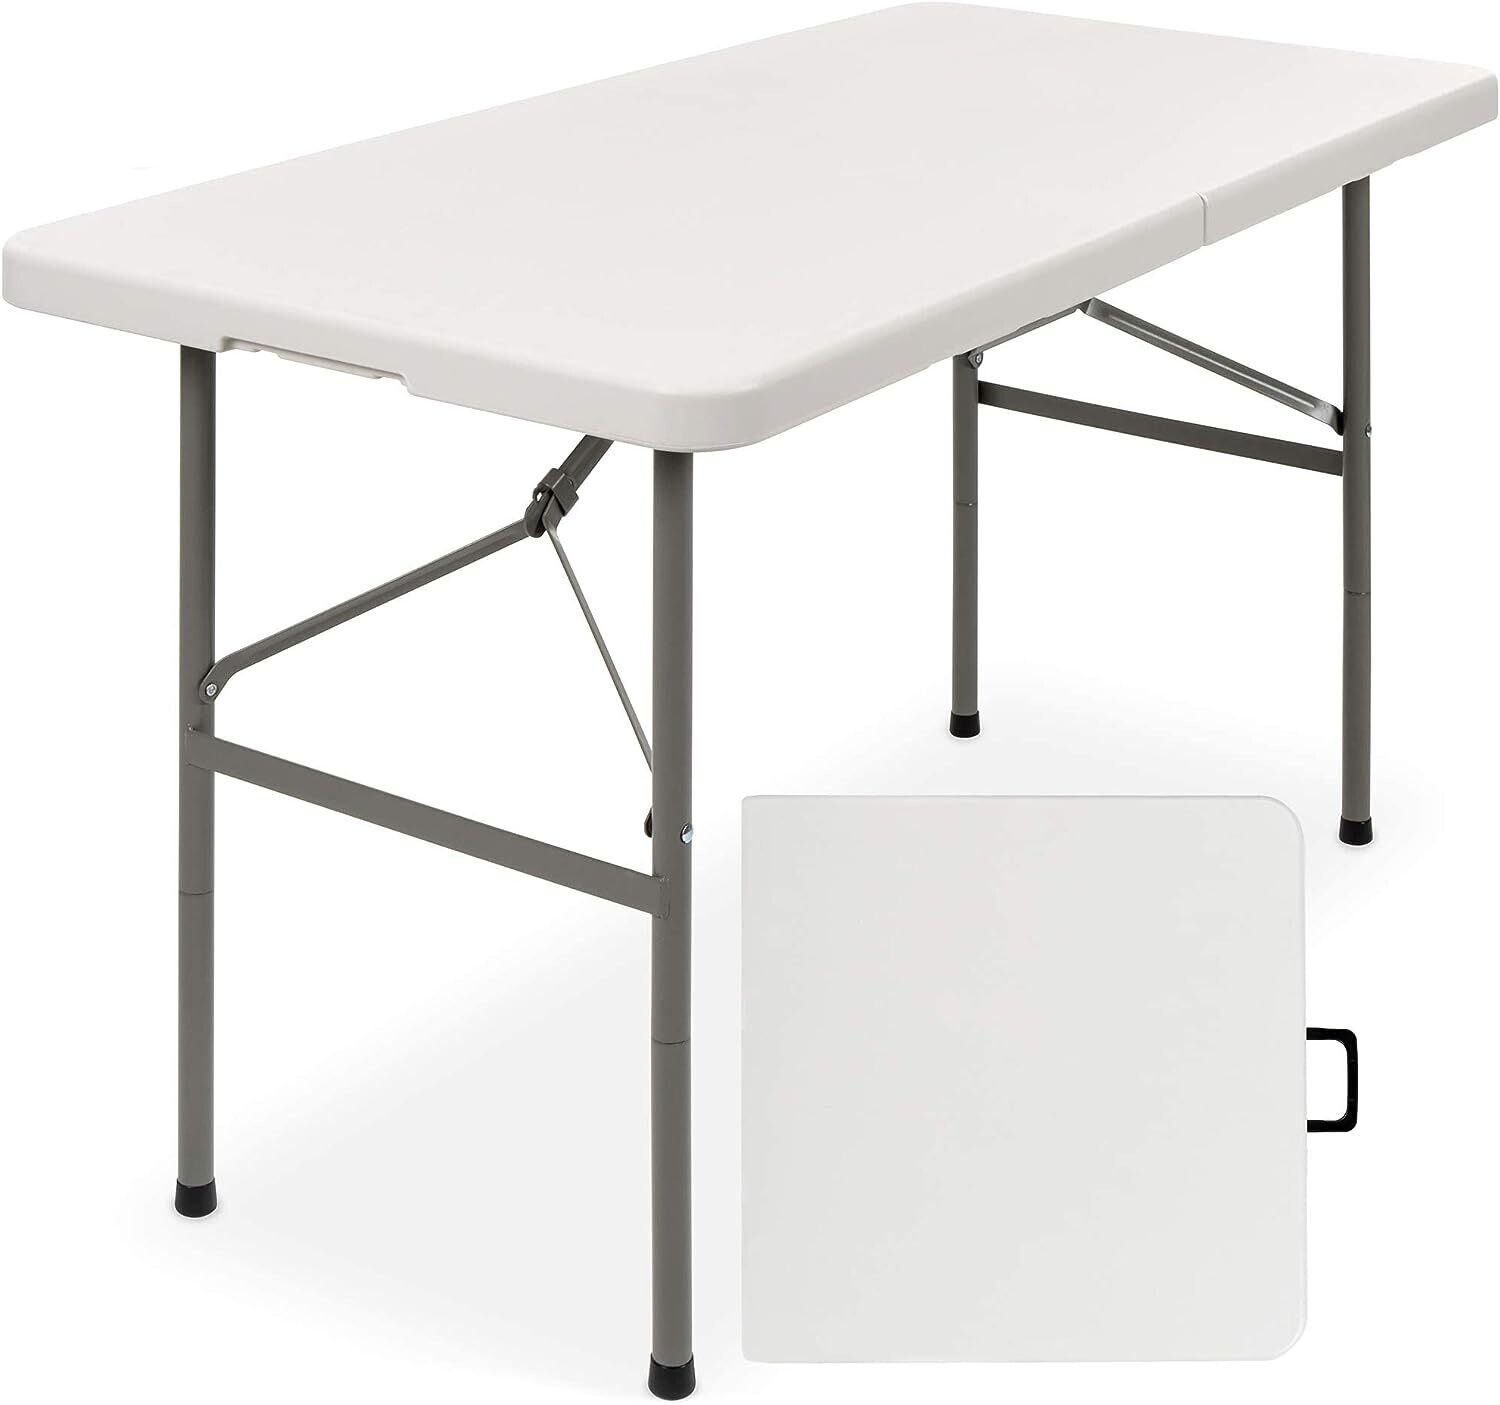 Strong Foldable Table in plastic Length 2.4m capacity 130kg Extra Large